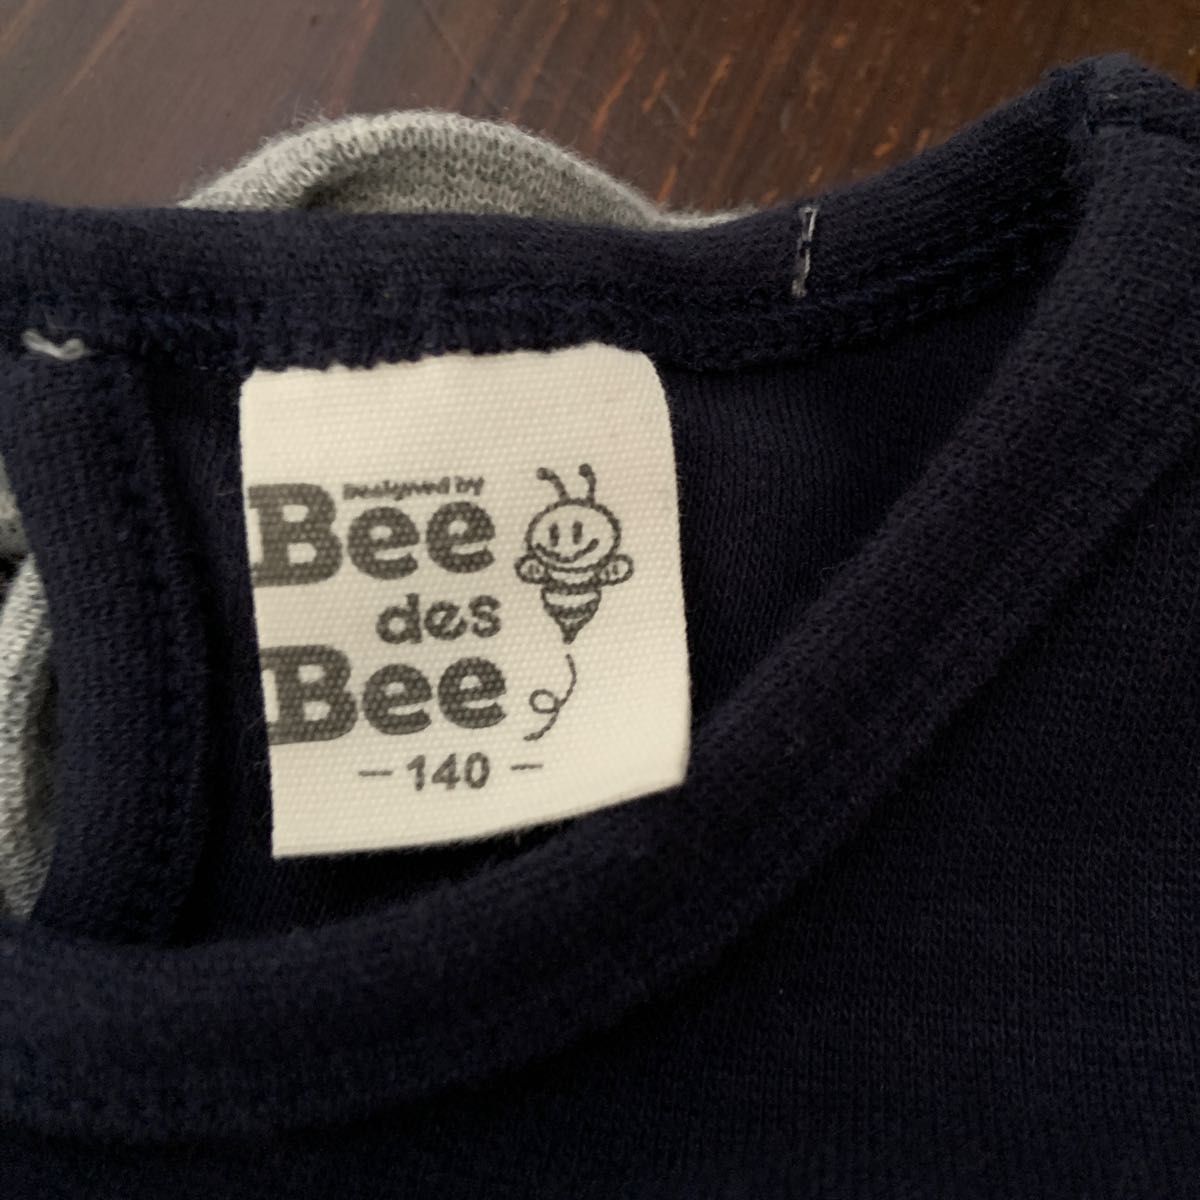 Bee des Bee トップス　バックリボン　140